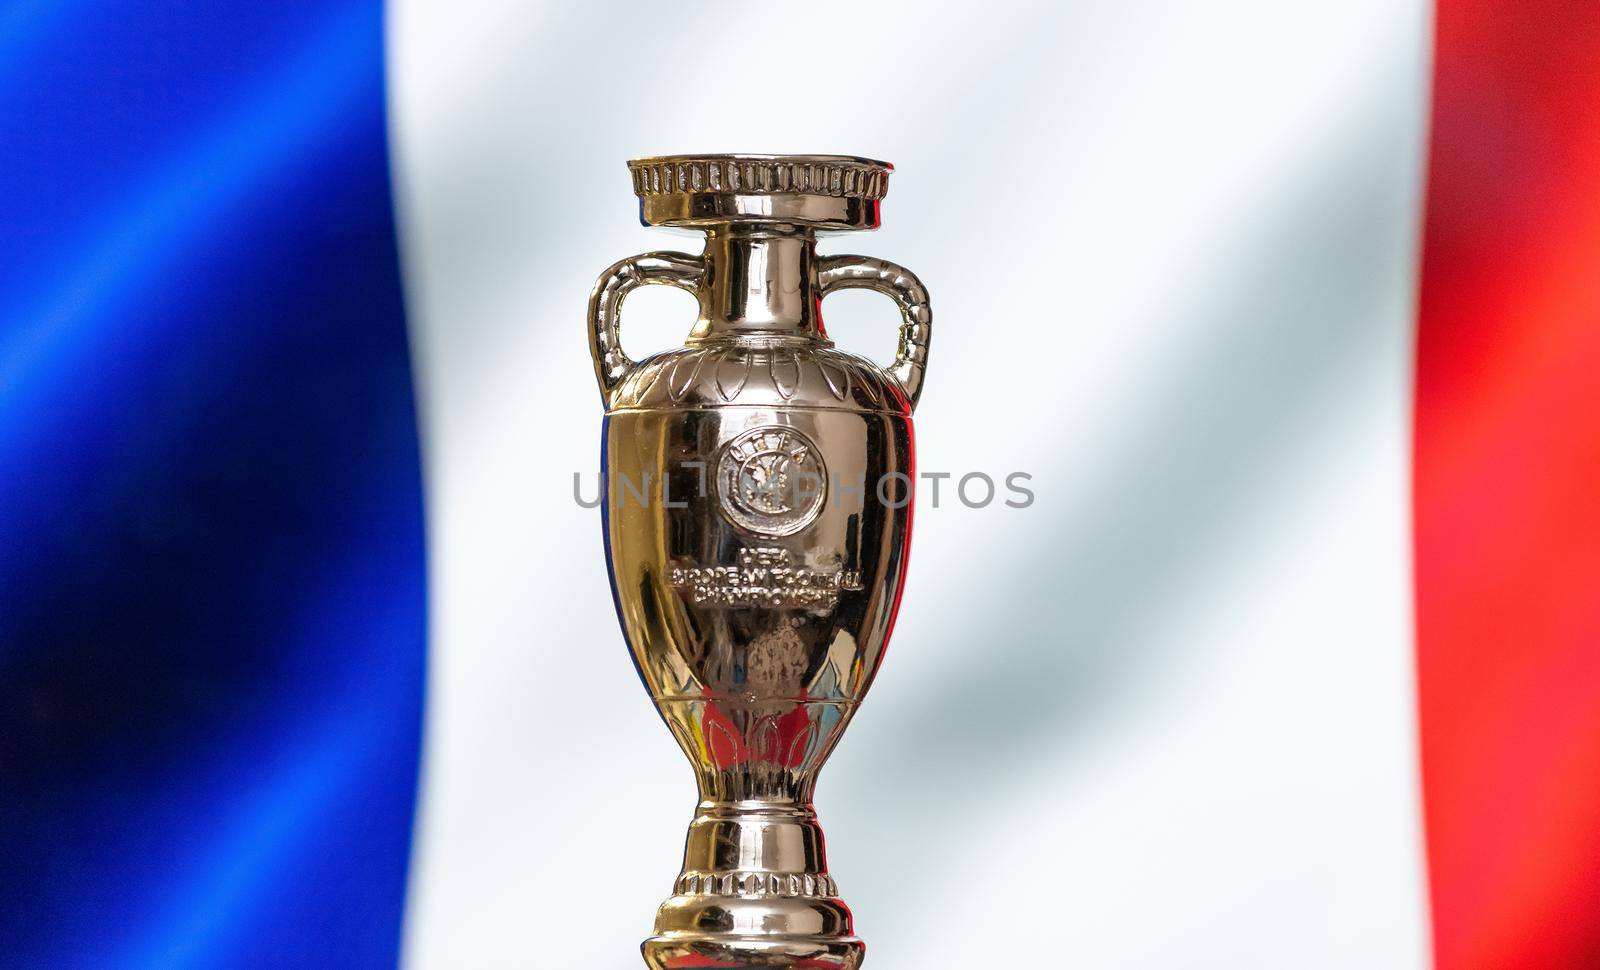 April 10, 2021. Paris, France. UEFA European Championship Cup with the French flag in the background.